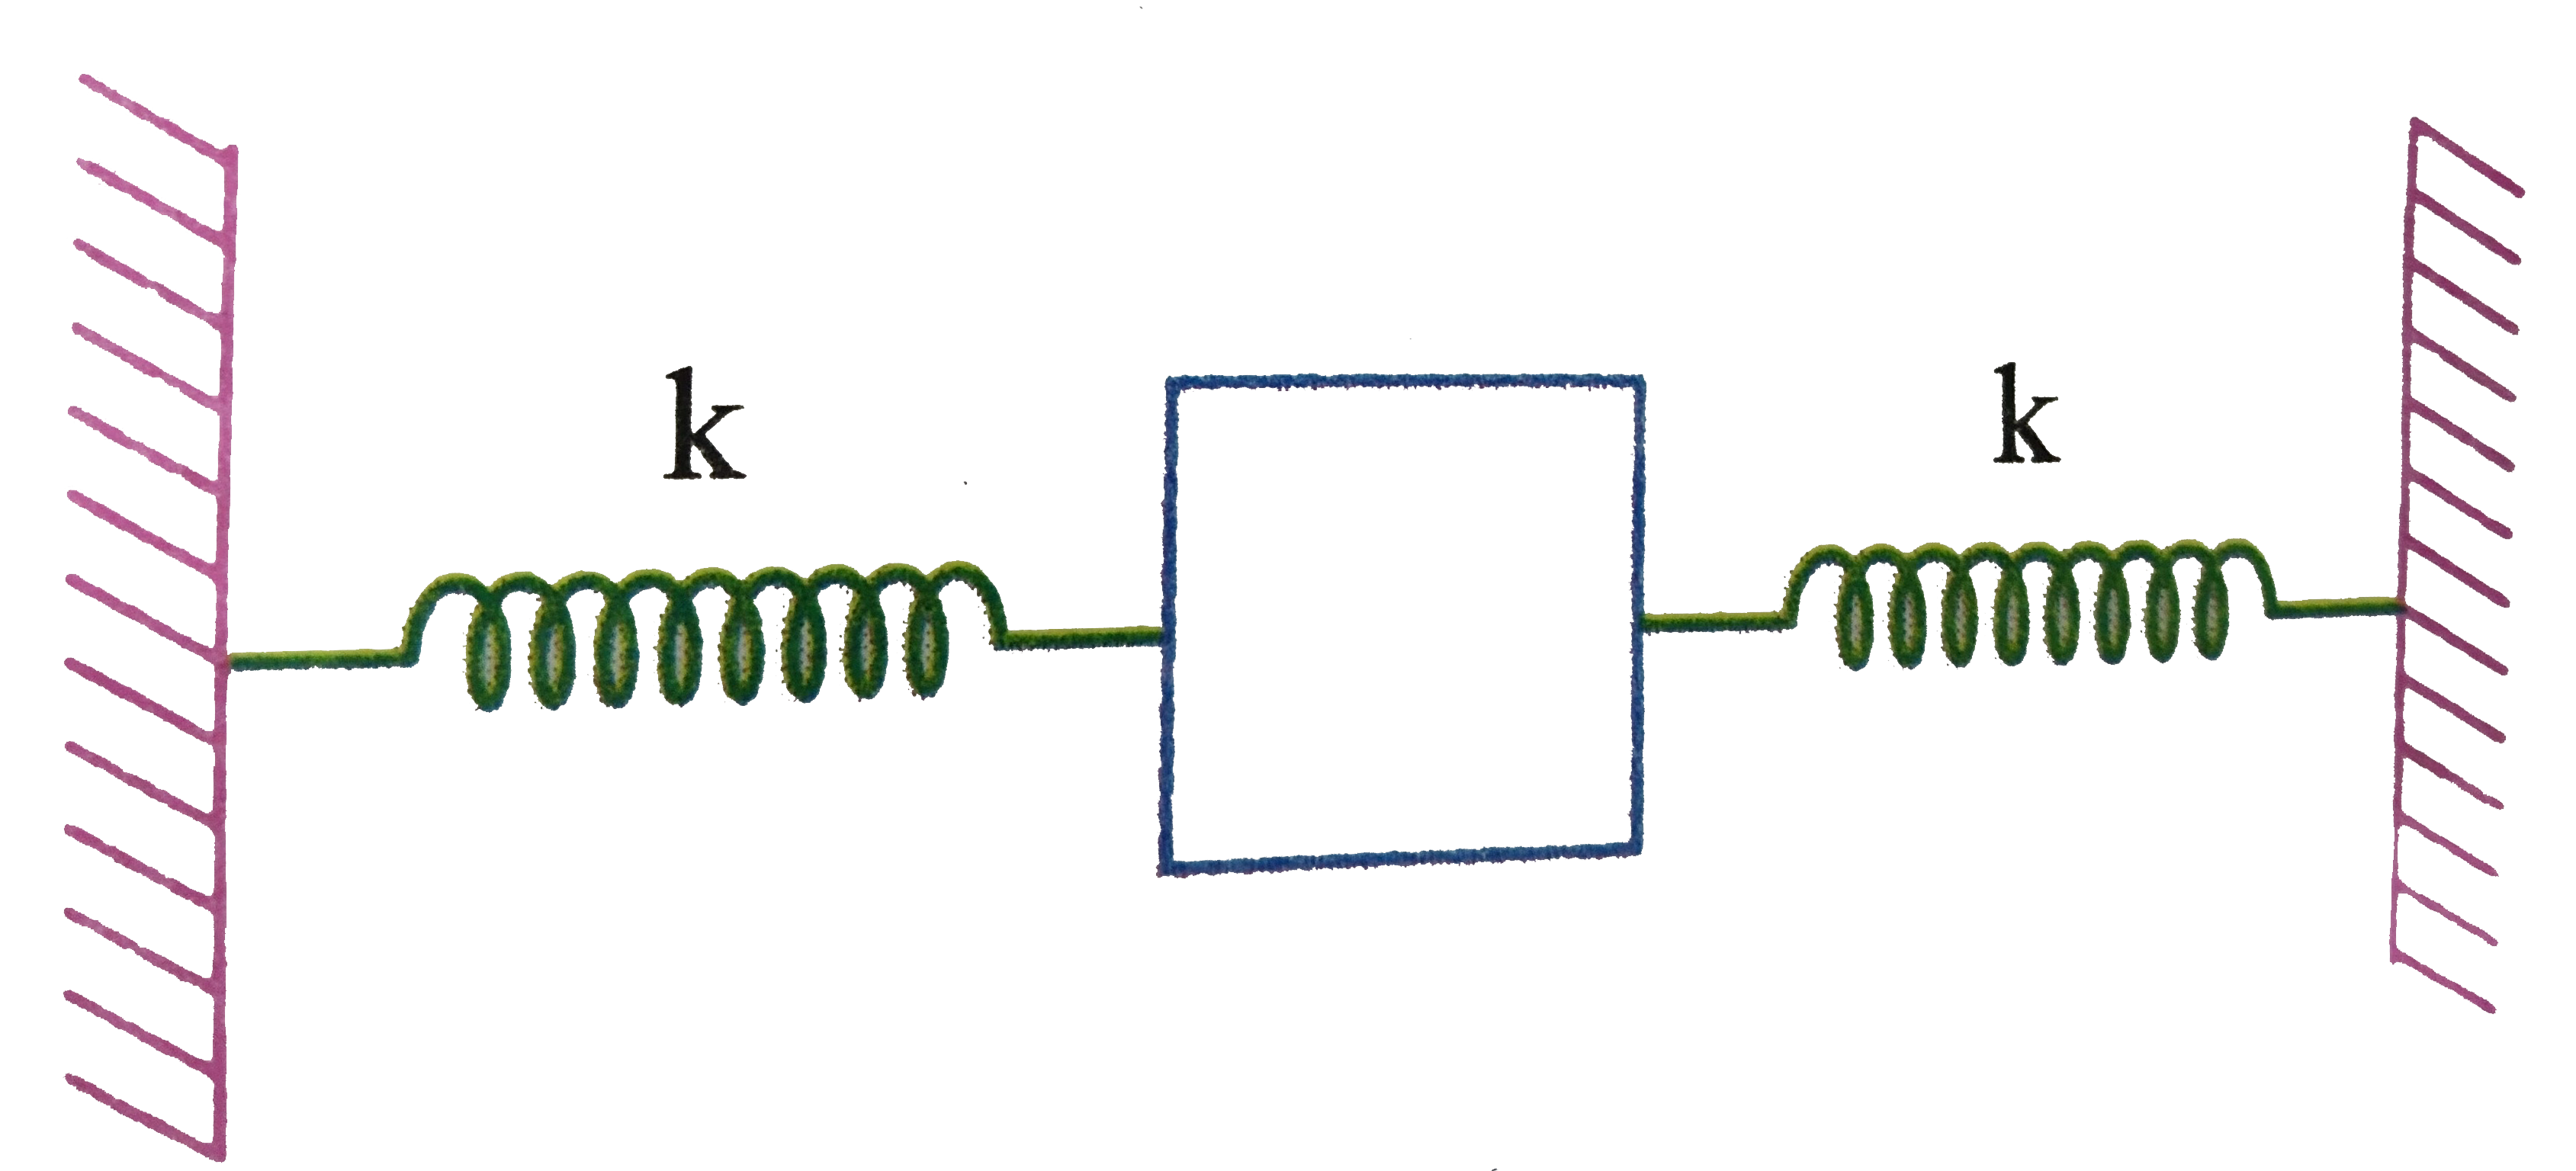 A block is tied within two spring, each having spring constant equal to k. Initially the springs are in their natural length and horizontal as shown. The block is released from rest. The springs are ideal, acceleration due to gravity is g downwards. Air resistance is to be neglect. The natural length of spring is l(0).      If the block is under equilibrium and the angle made by the spring with horizontal is 60^(@) then the mass of the block is: